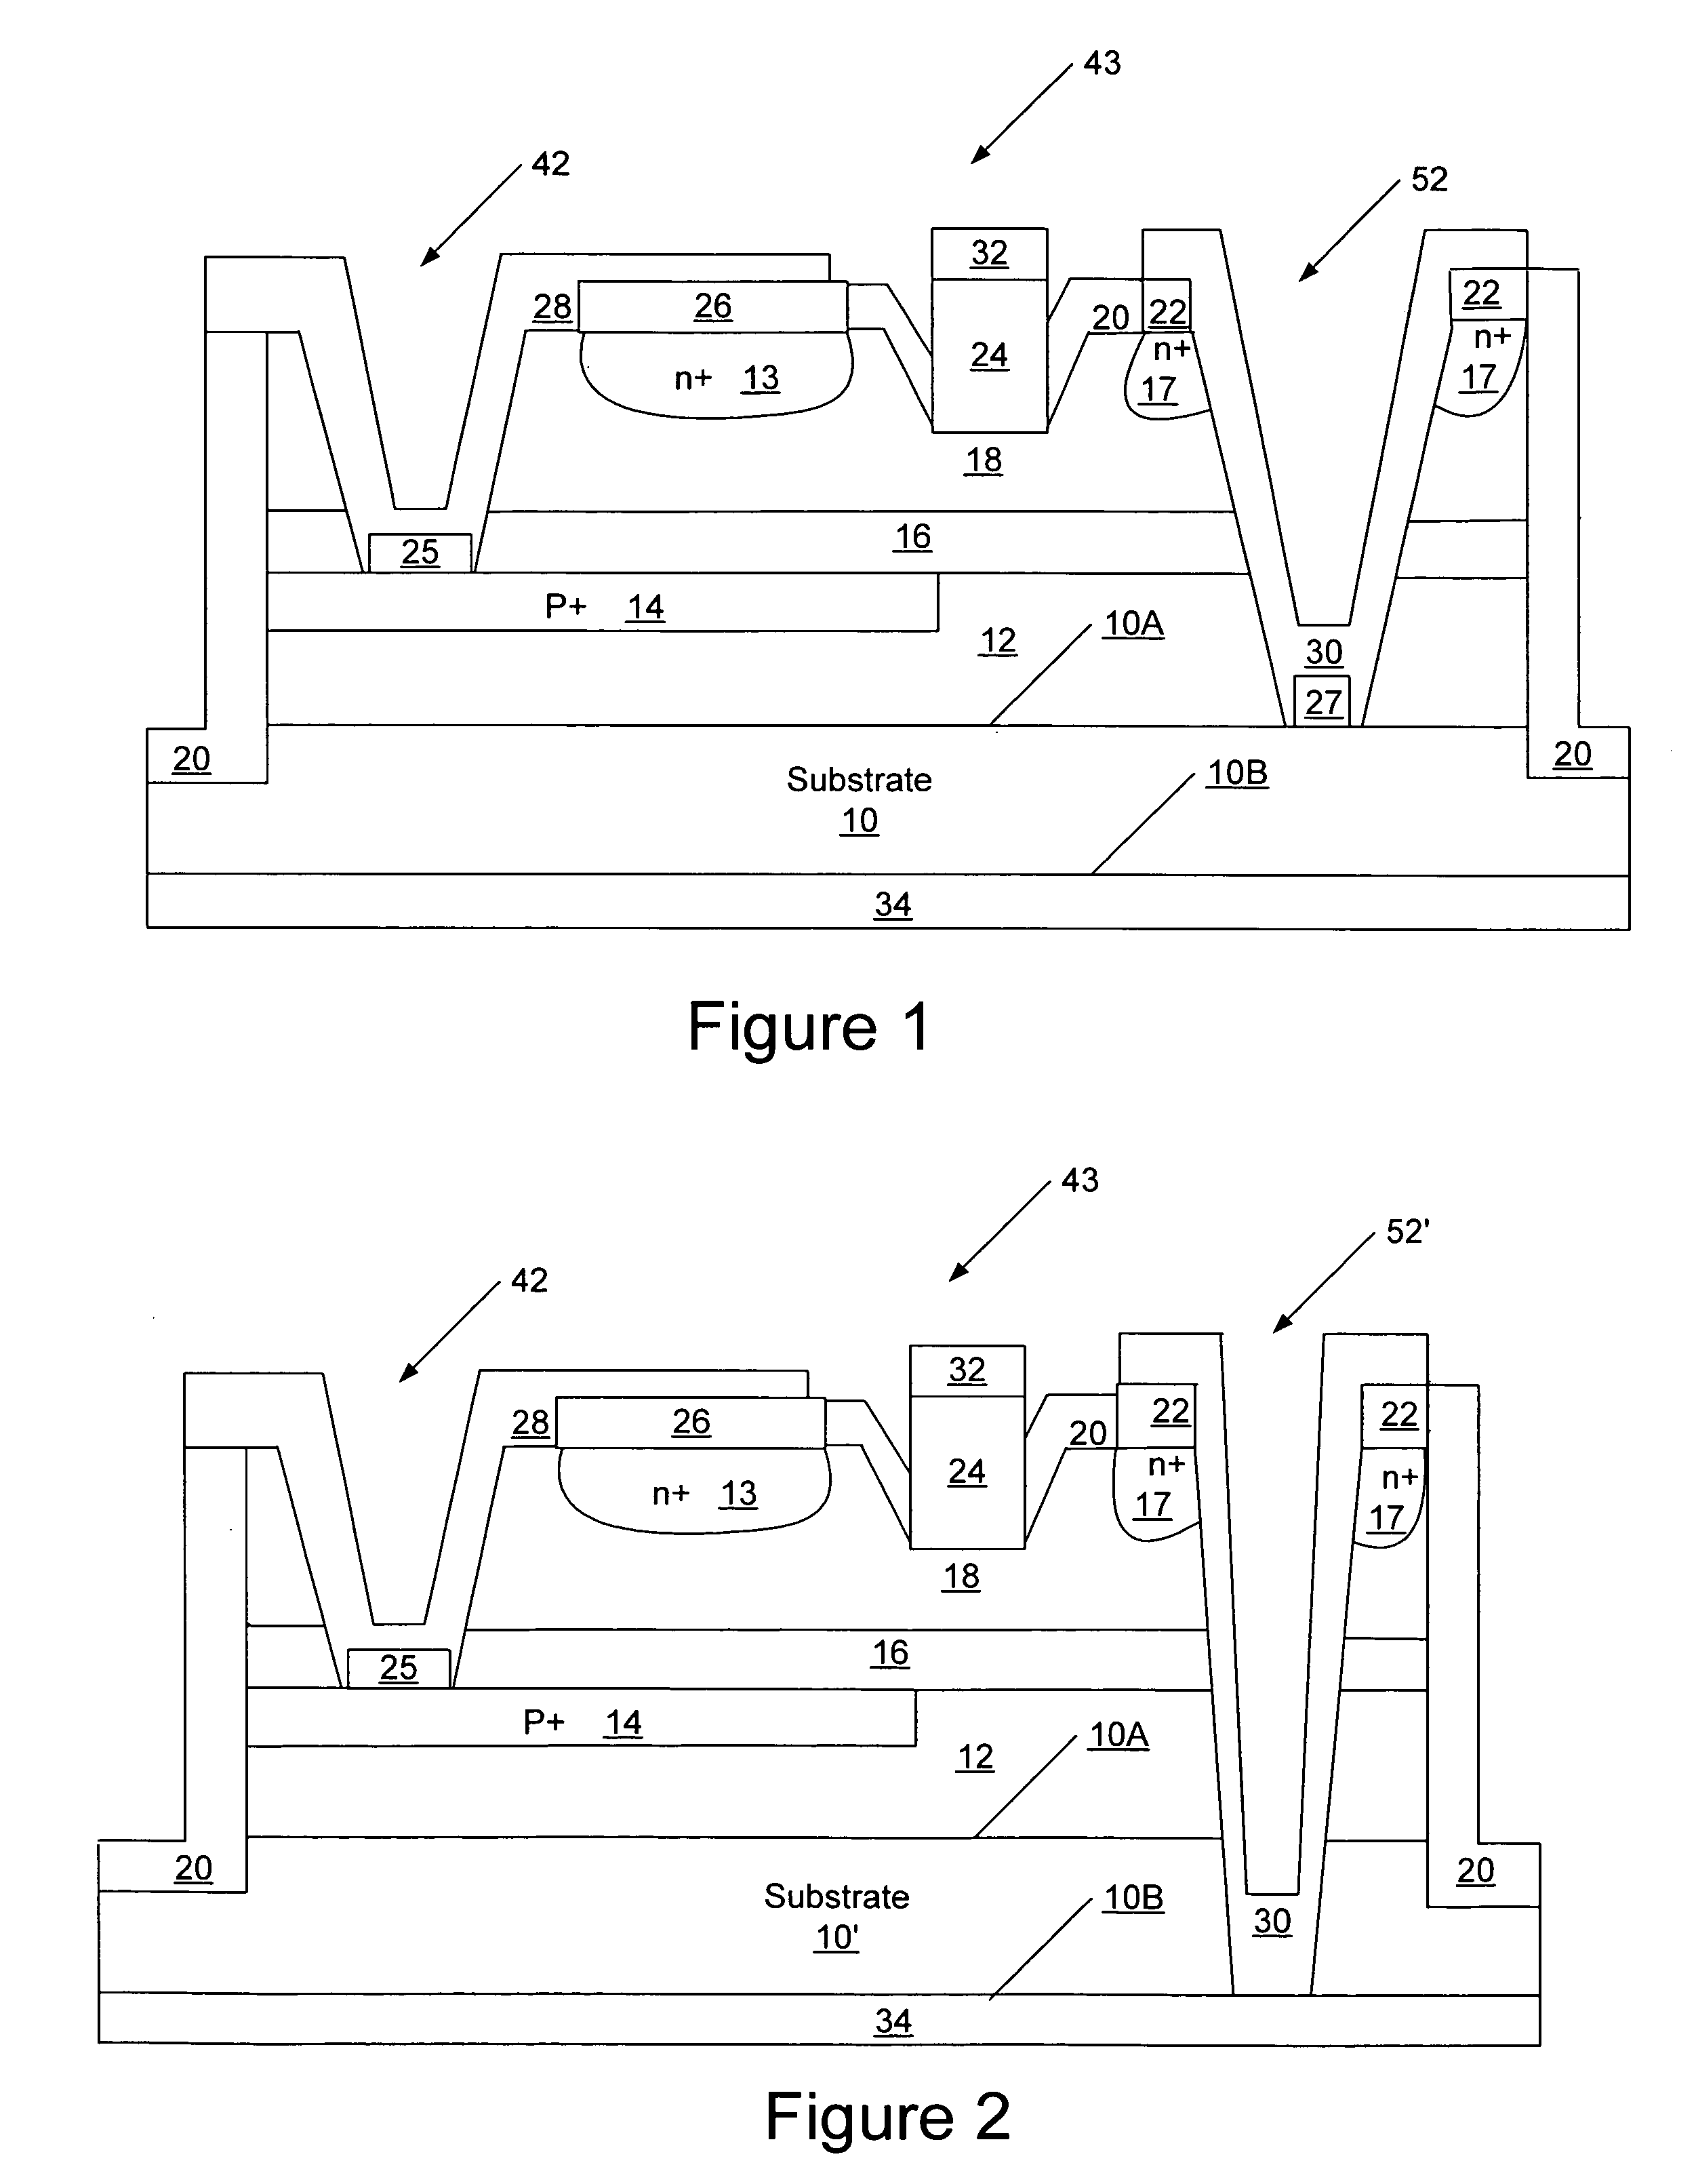 Metal-semiconductor field effect transistors (MESFETs) having drains coupled to the substrate and methods of fabricating the same